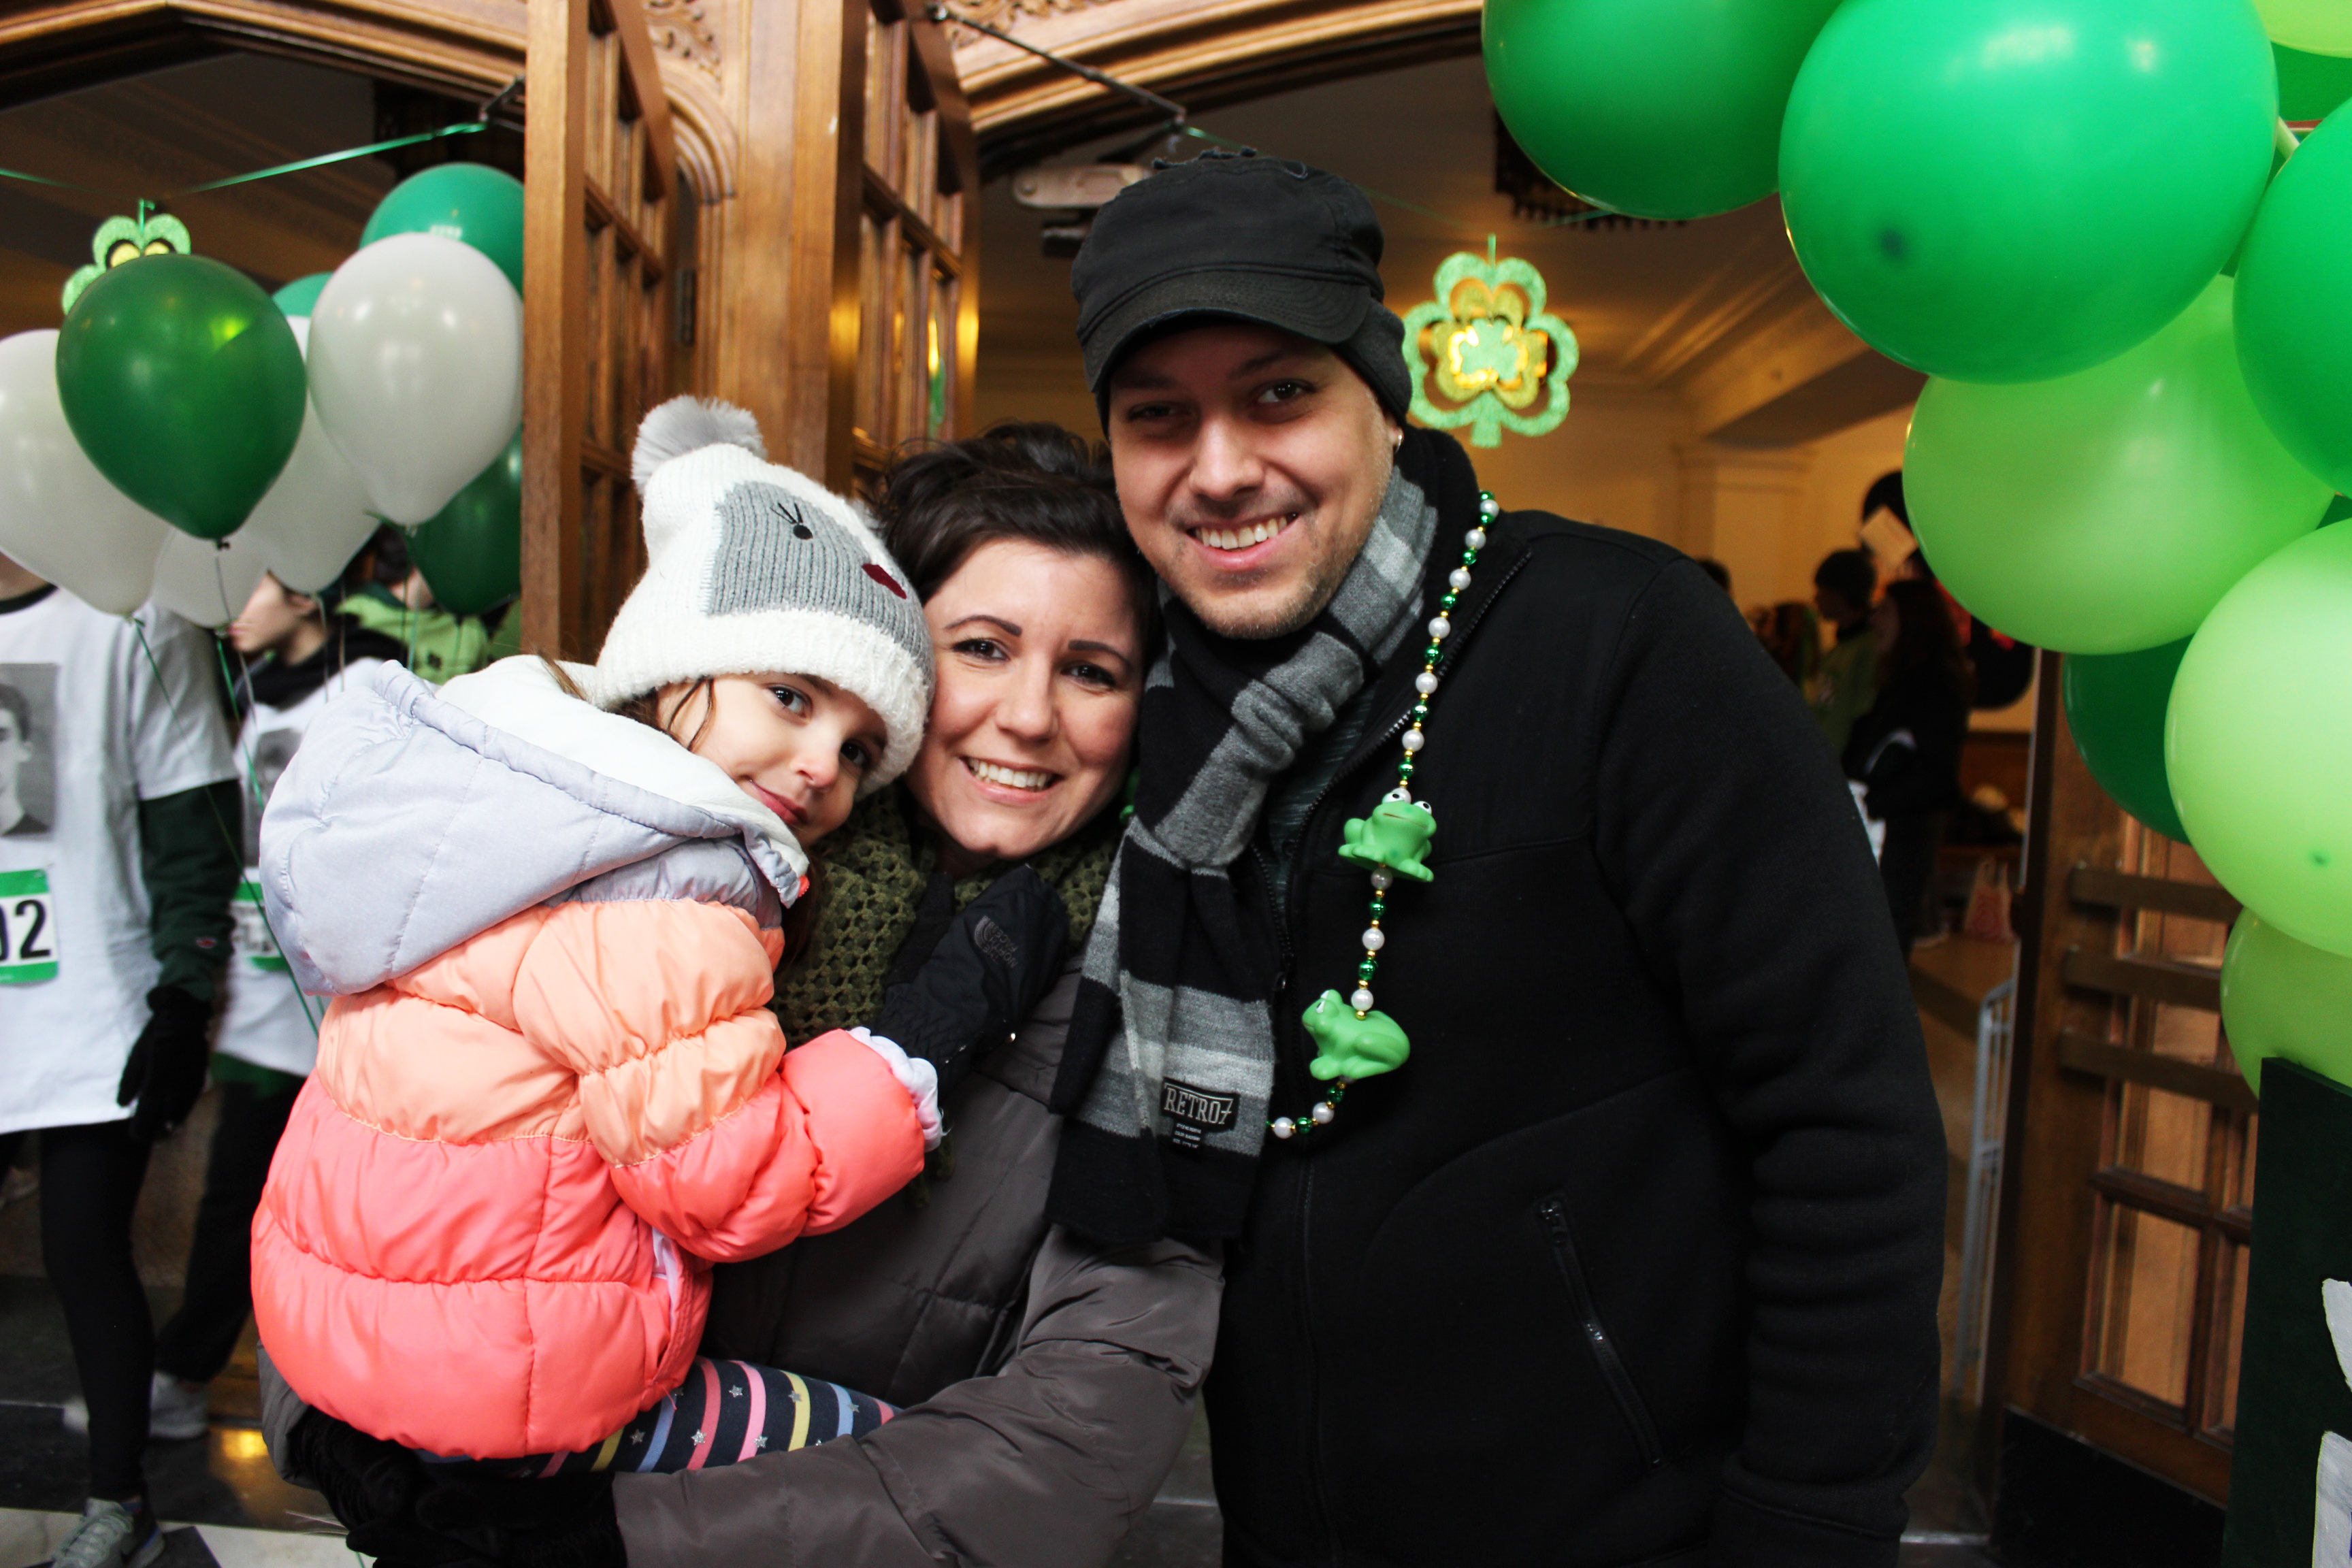 Photo of Caleb Sandoval with his wife Leanne and daughter Charlotte at the 19th Annual RCPD/Tower Guard Shamrock 5k Race in 2019 posing in front of Shamrock decorations and green and white balloons. 